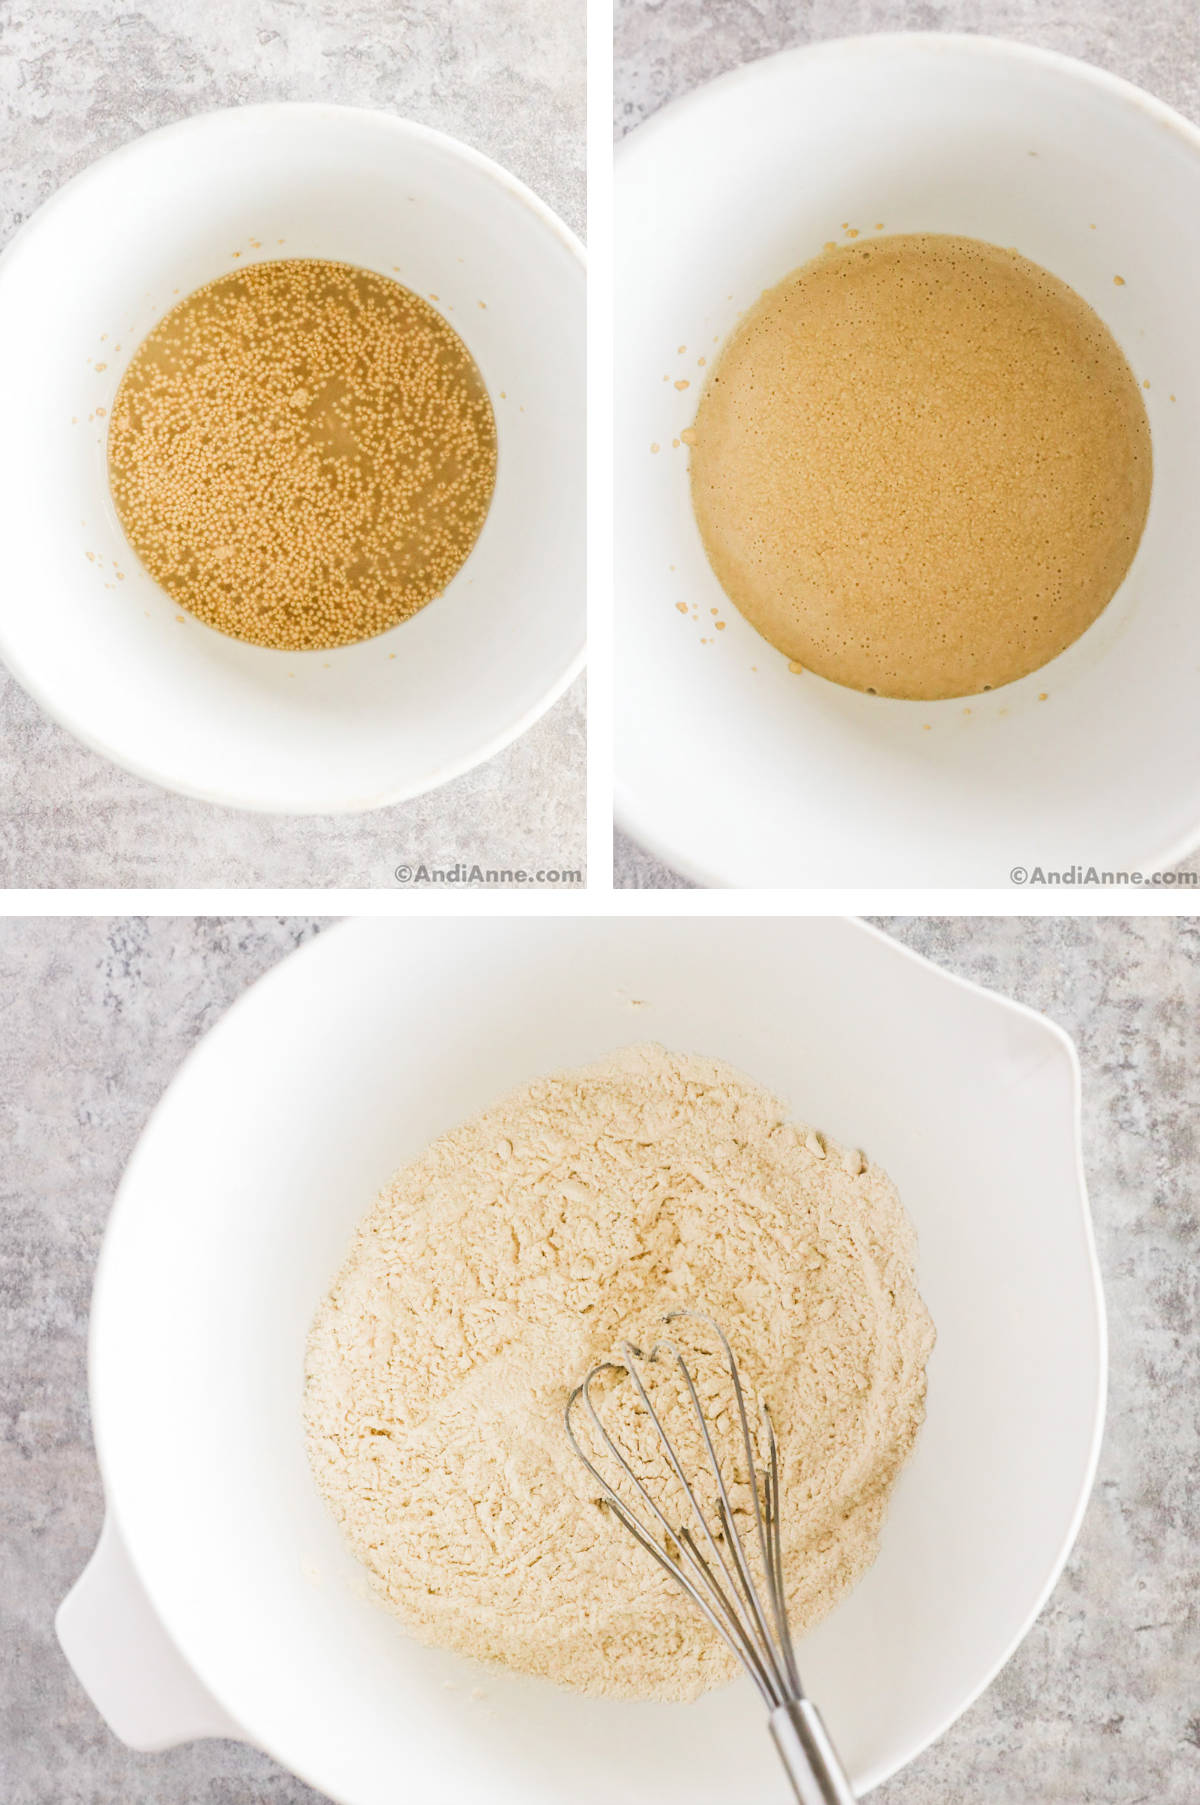 Bowl of yeast and bowl of dry ingredients